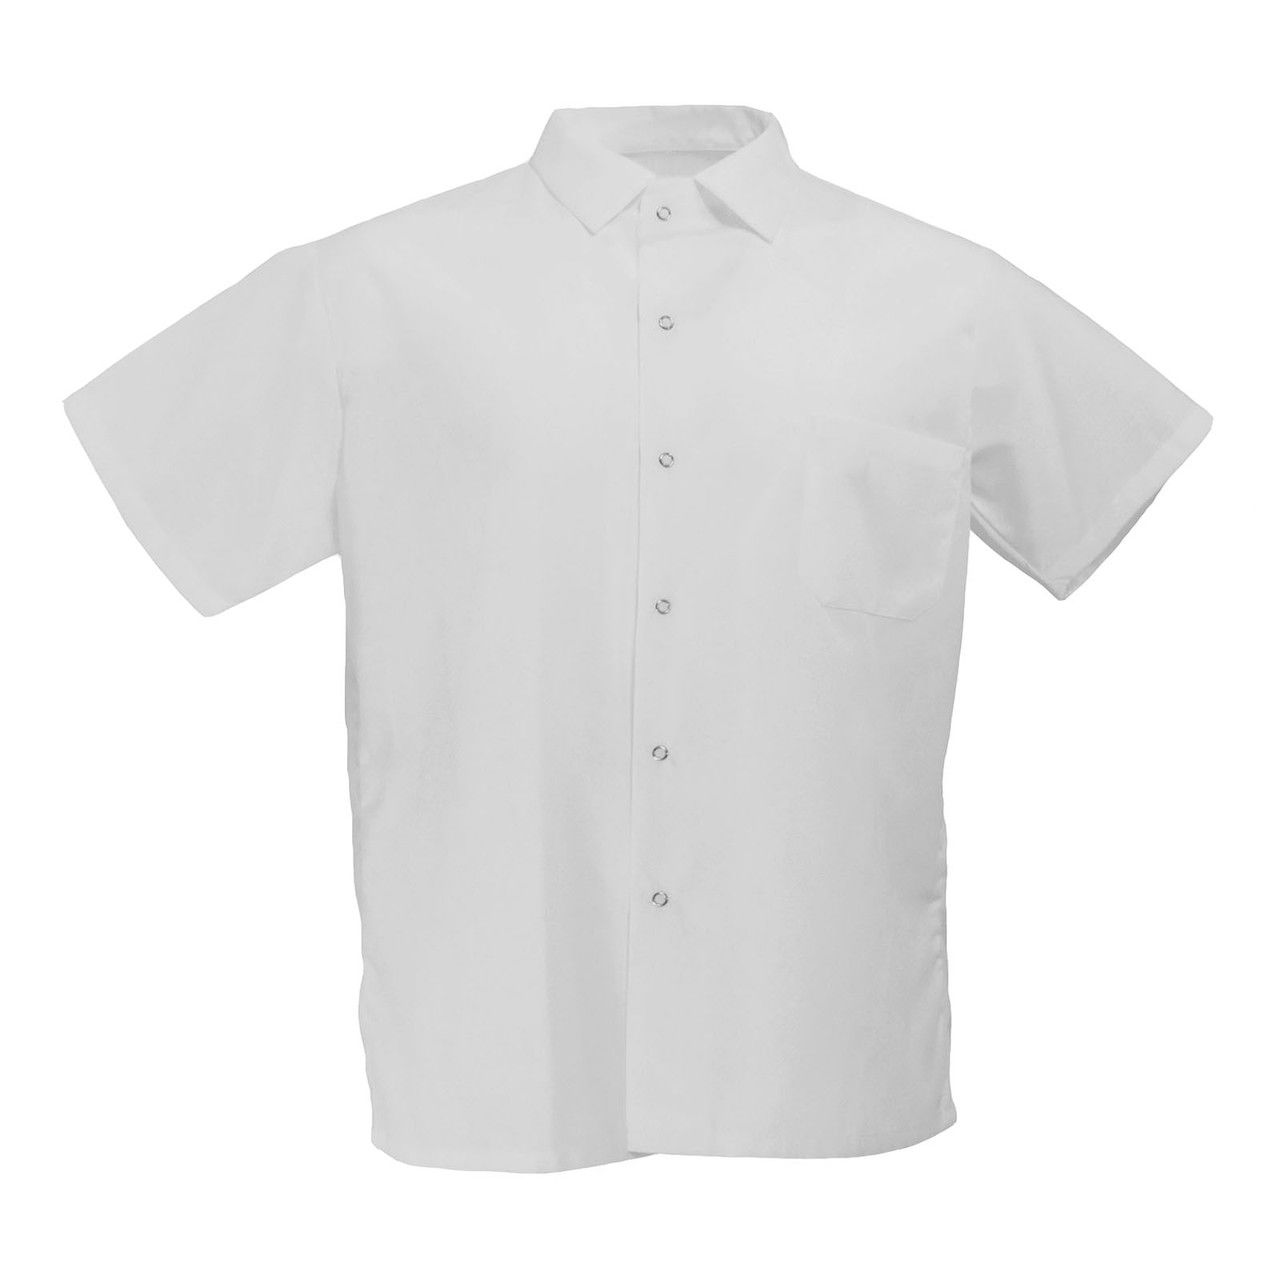 Does the Chef Trend S102 chef white shirts come with a sizing guide?